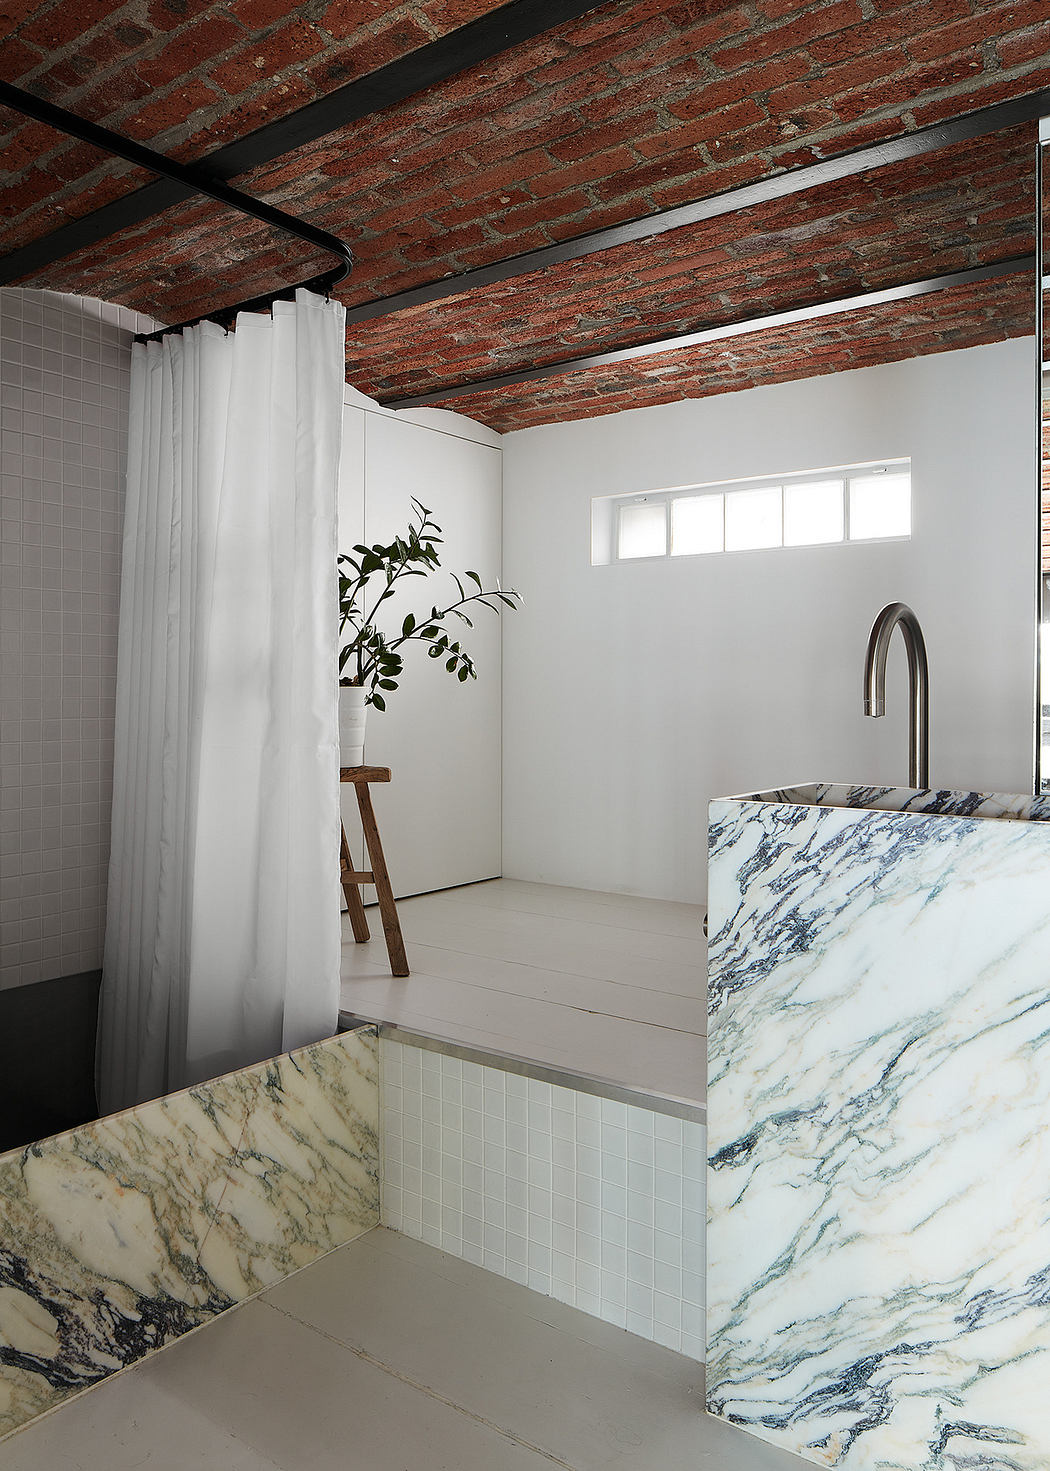 Minimalist bathroom with marble details and exposed brick ceiling.